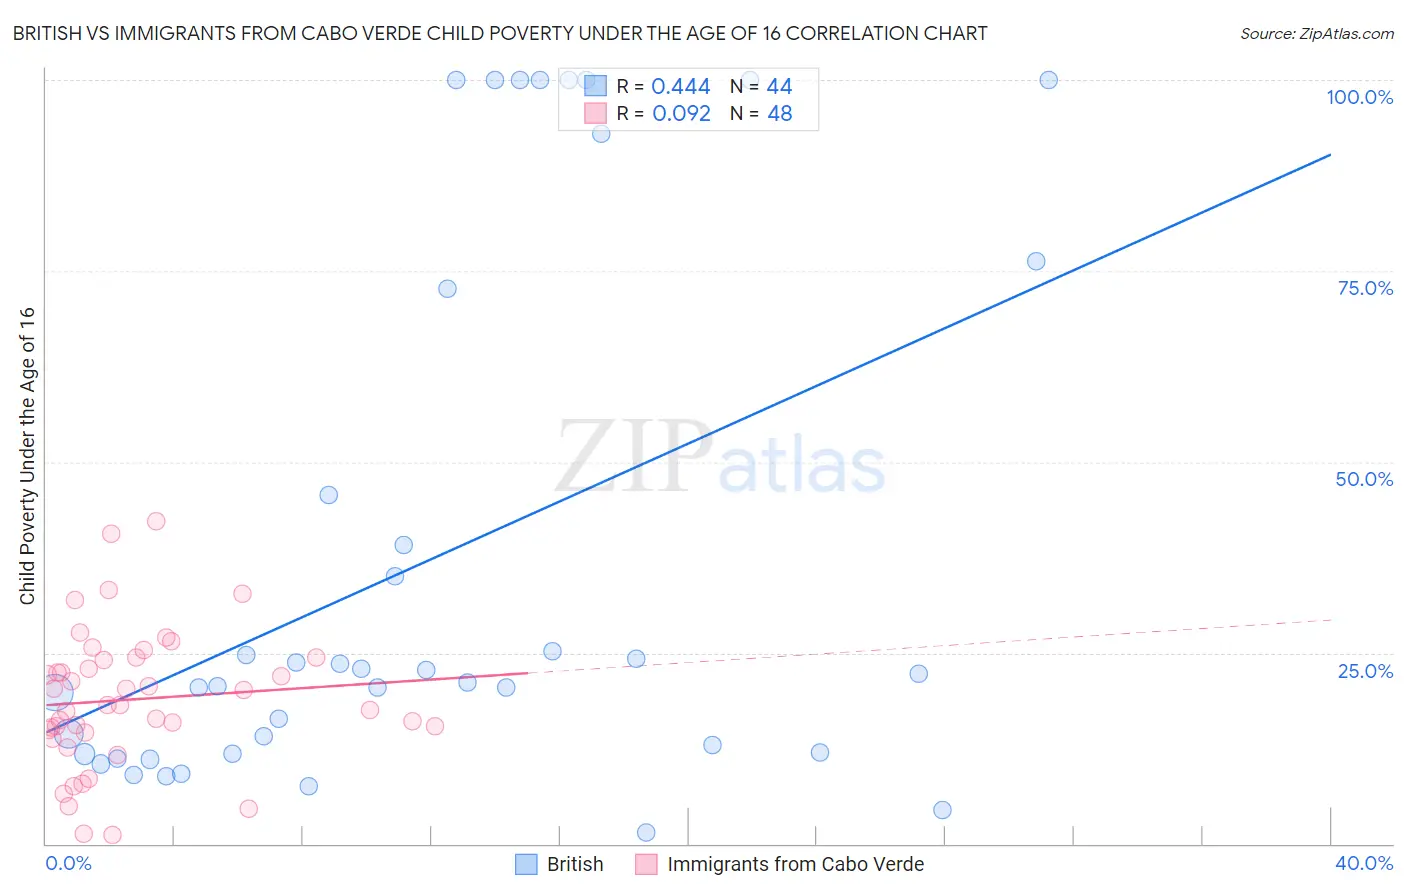 British vs Immigrants from Cabo Verde Child Poverty Under the Age of 16